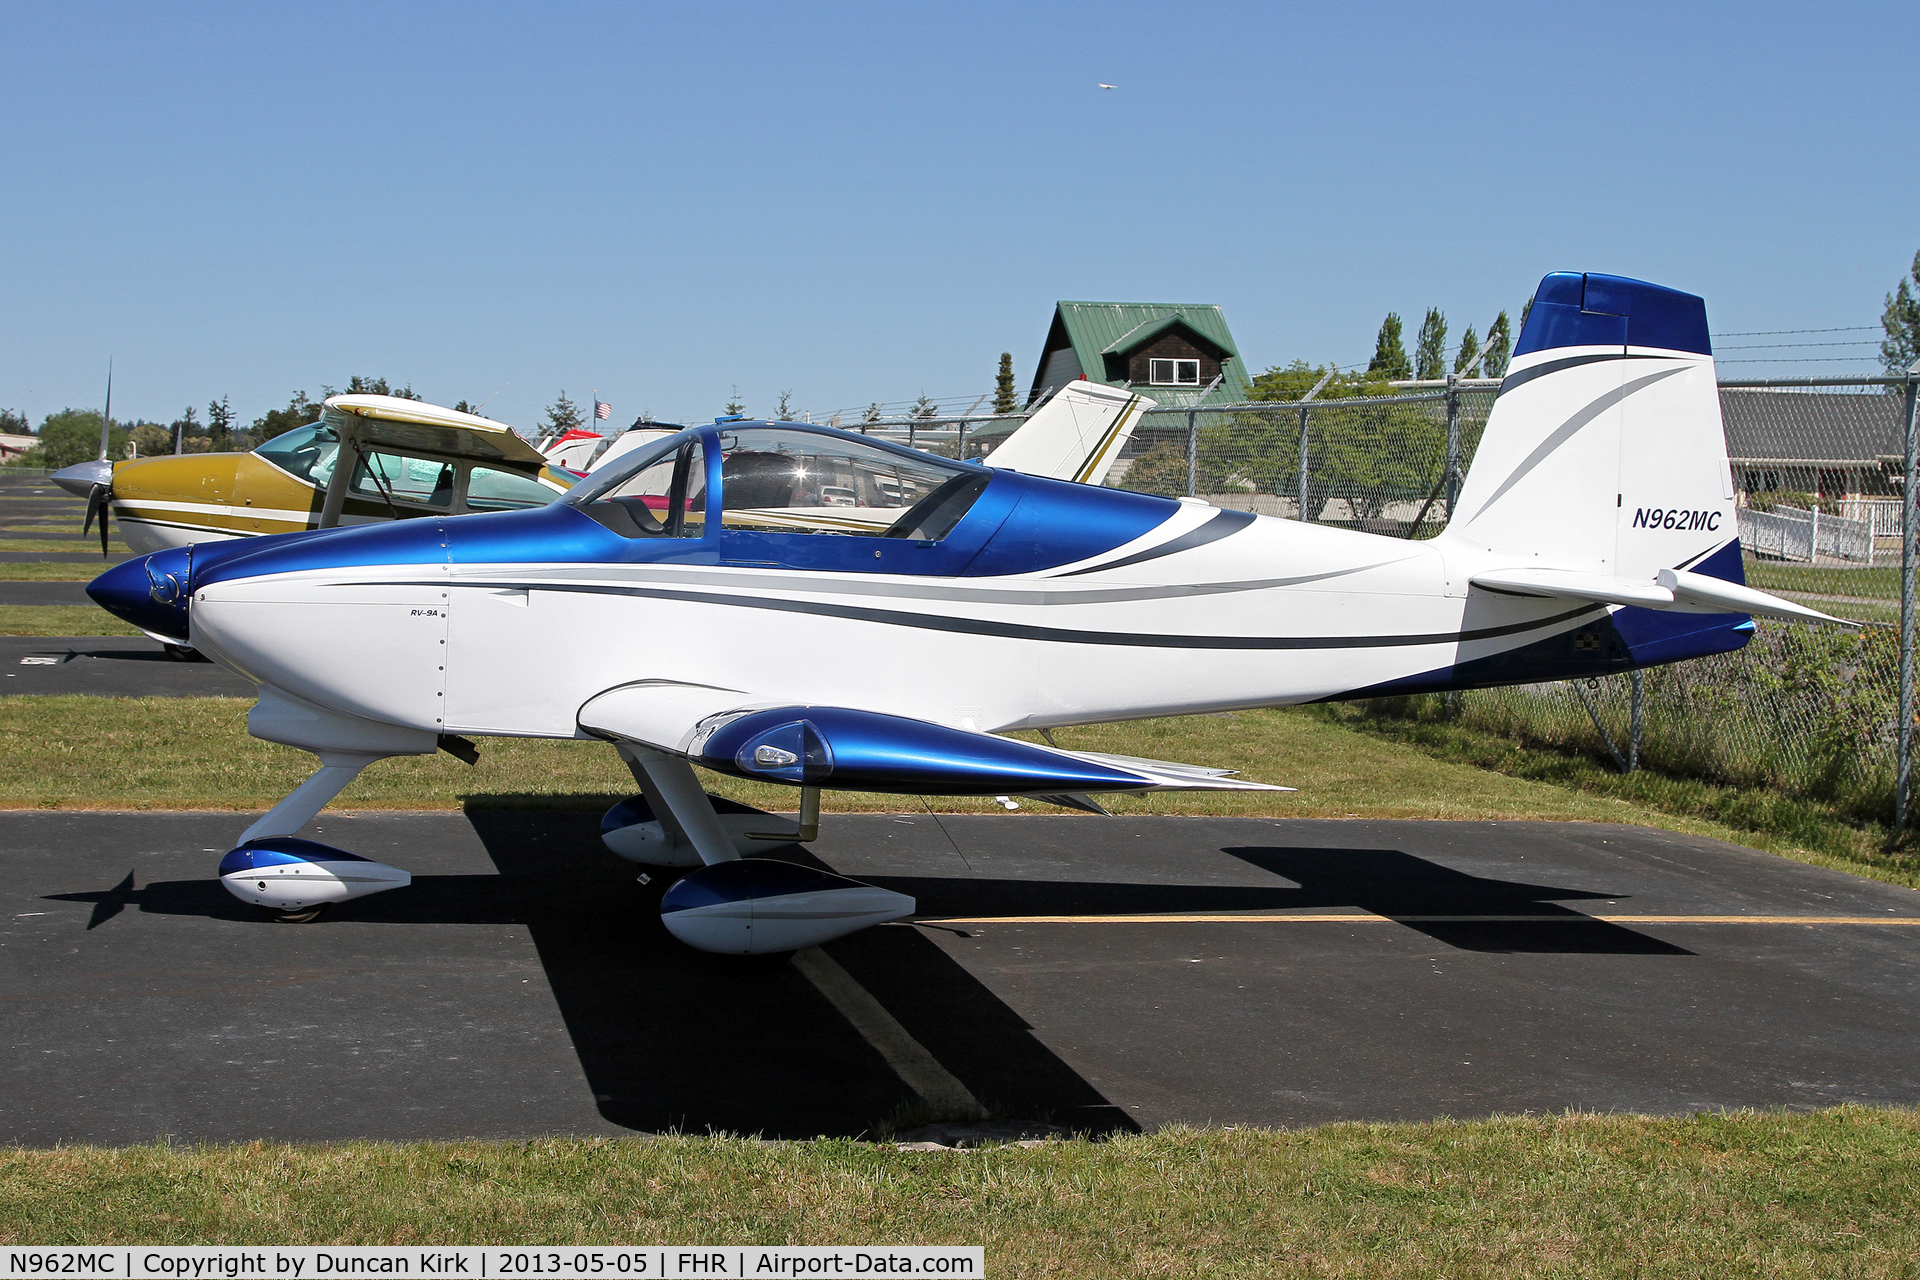 N962MC, Vans RV-9A C/N 91244, The sun in the Pacific NW drives many aviators to the San Juan Islands including this RV-9,